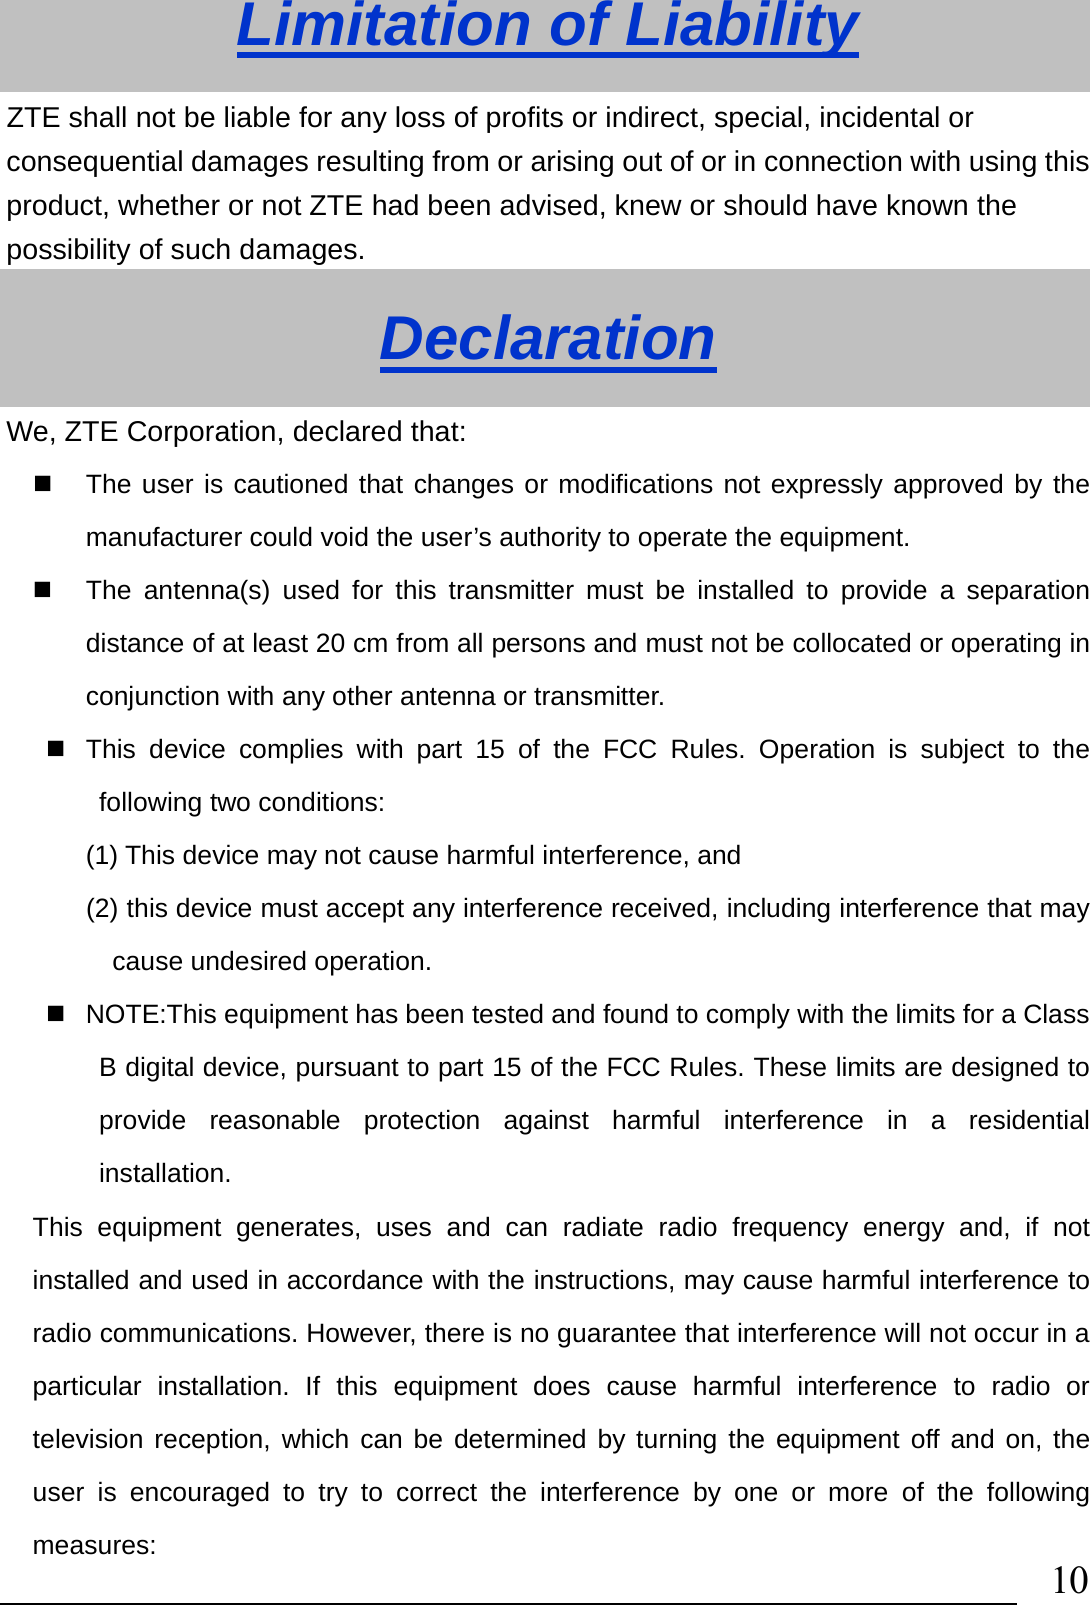                                10Limitation of Liability ZTE shall not be liable for any loss of profits or indirect, special, incidental or consequential damages resulting from or arising out of or in connection with using this product, whether or not ZTE had been advised, knew or should have known the possibility of such damages. Declaration We, ZTE Corporation, declared that:   The user is cautioned that changes or modifications not expressly approved by the manufacturer could void the user’s authority to operate the equipment.   The antenna(s) used for this transmitter must be installed to provide a separation distance of at least 20 cm from all persons and must not be collocated or operating in conjunction with any other antenna or transmitter.   This device complies with part 15 of the FCC Rules. Operation is subject to the following two conditions:   (1) This device may not cause harmful interference, and   (2) this device must accept any interference received, including interference that may cause undesired operation.   NOTE:This equipment has been tested and found to comply with the limits for a Class B digital device, pursuant to part 15 of the FCC Rules. These limits are designed to provide reasonable protection against harmful interference in a residential installation.  This equipment generates, uses and can radiate radio frequency energy and, if not installed and used in accordance with the instructions, may cause harmful interference to radio communications. However, there is no guarantee that interference will not occur in a particular installation. If this equipment does cause harmful interference to radio or television reception, which can be determined by turning the equipment off and on, the user is encouraged to try to correct the interference by one or more of the following measures: 